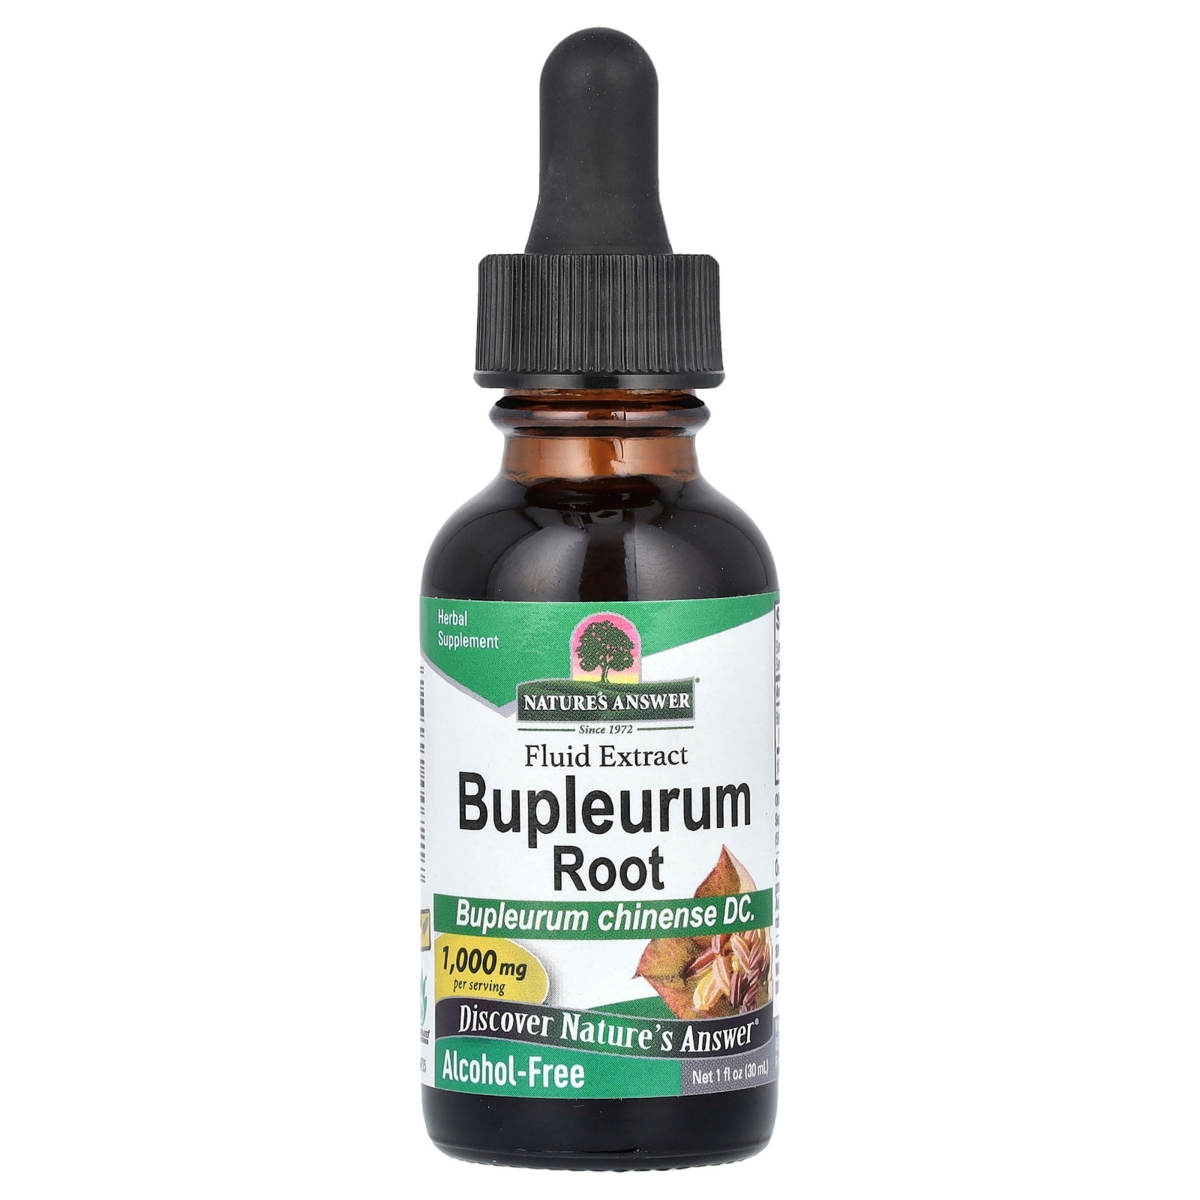 Bupleurum Root Fluid Extract Alcohol-Free 1 000 mg - 1 fl oz (30 ml) - Assorted Pre-pack (See Table